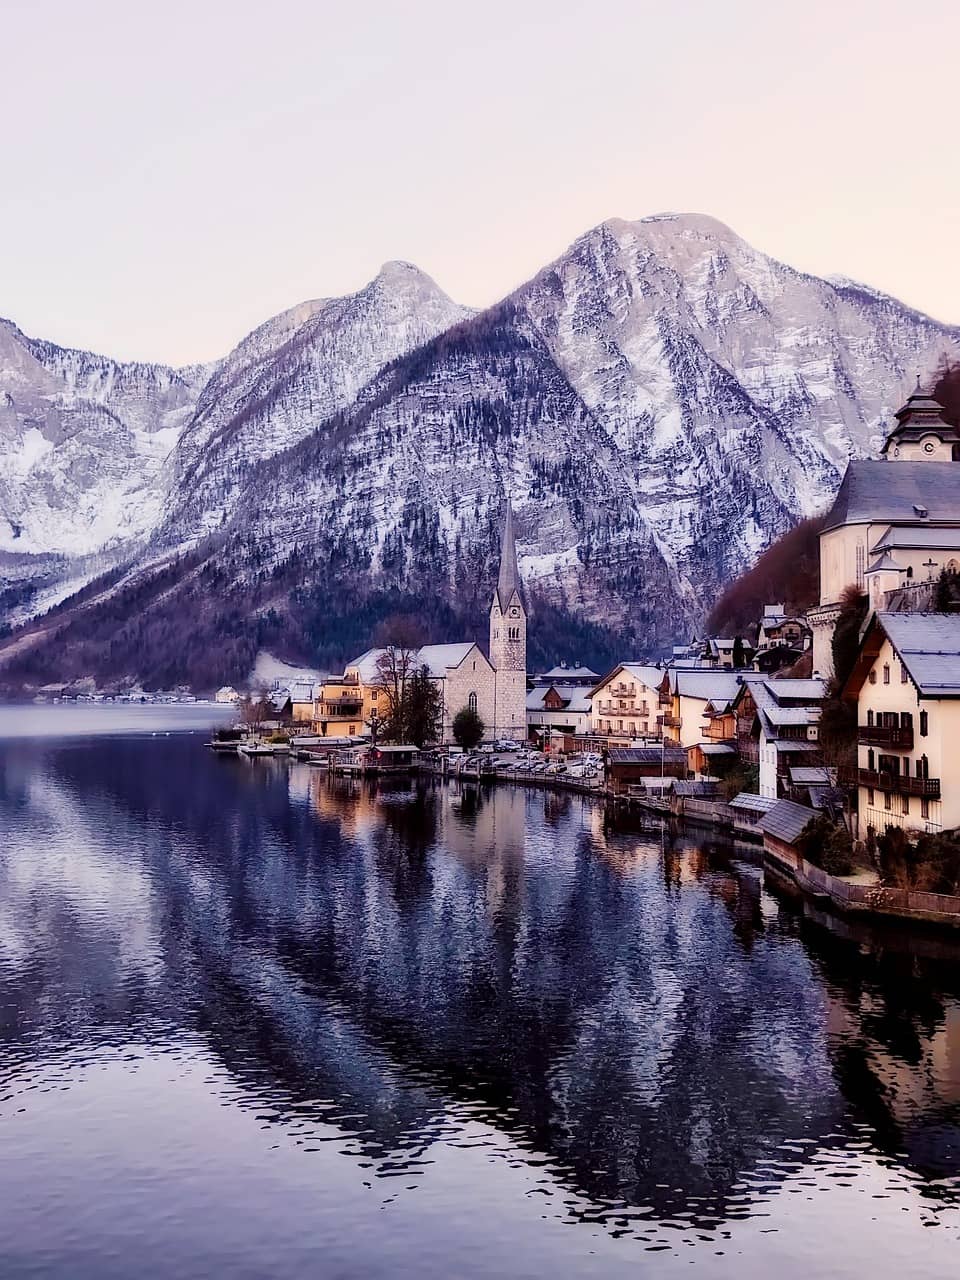 25 Best Cities in Europe to Visit for A Dreamy Winter Getaway